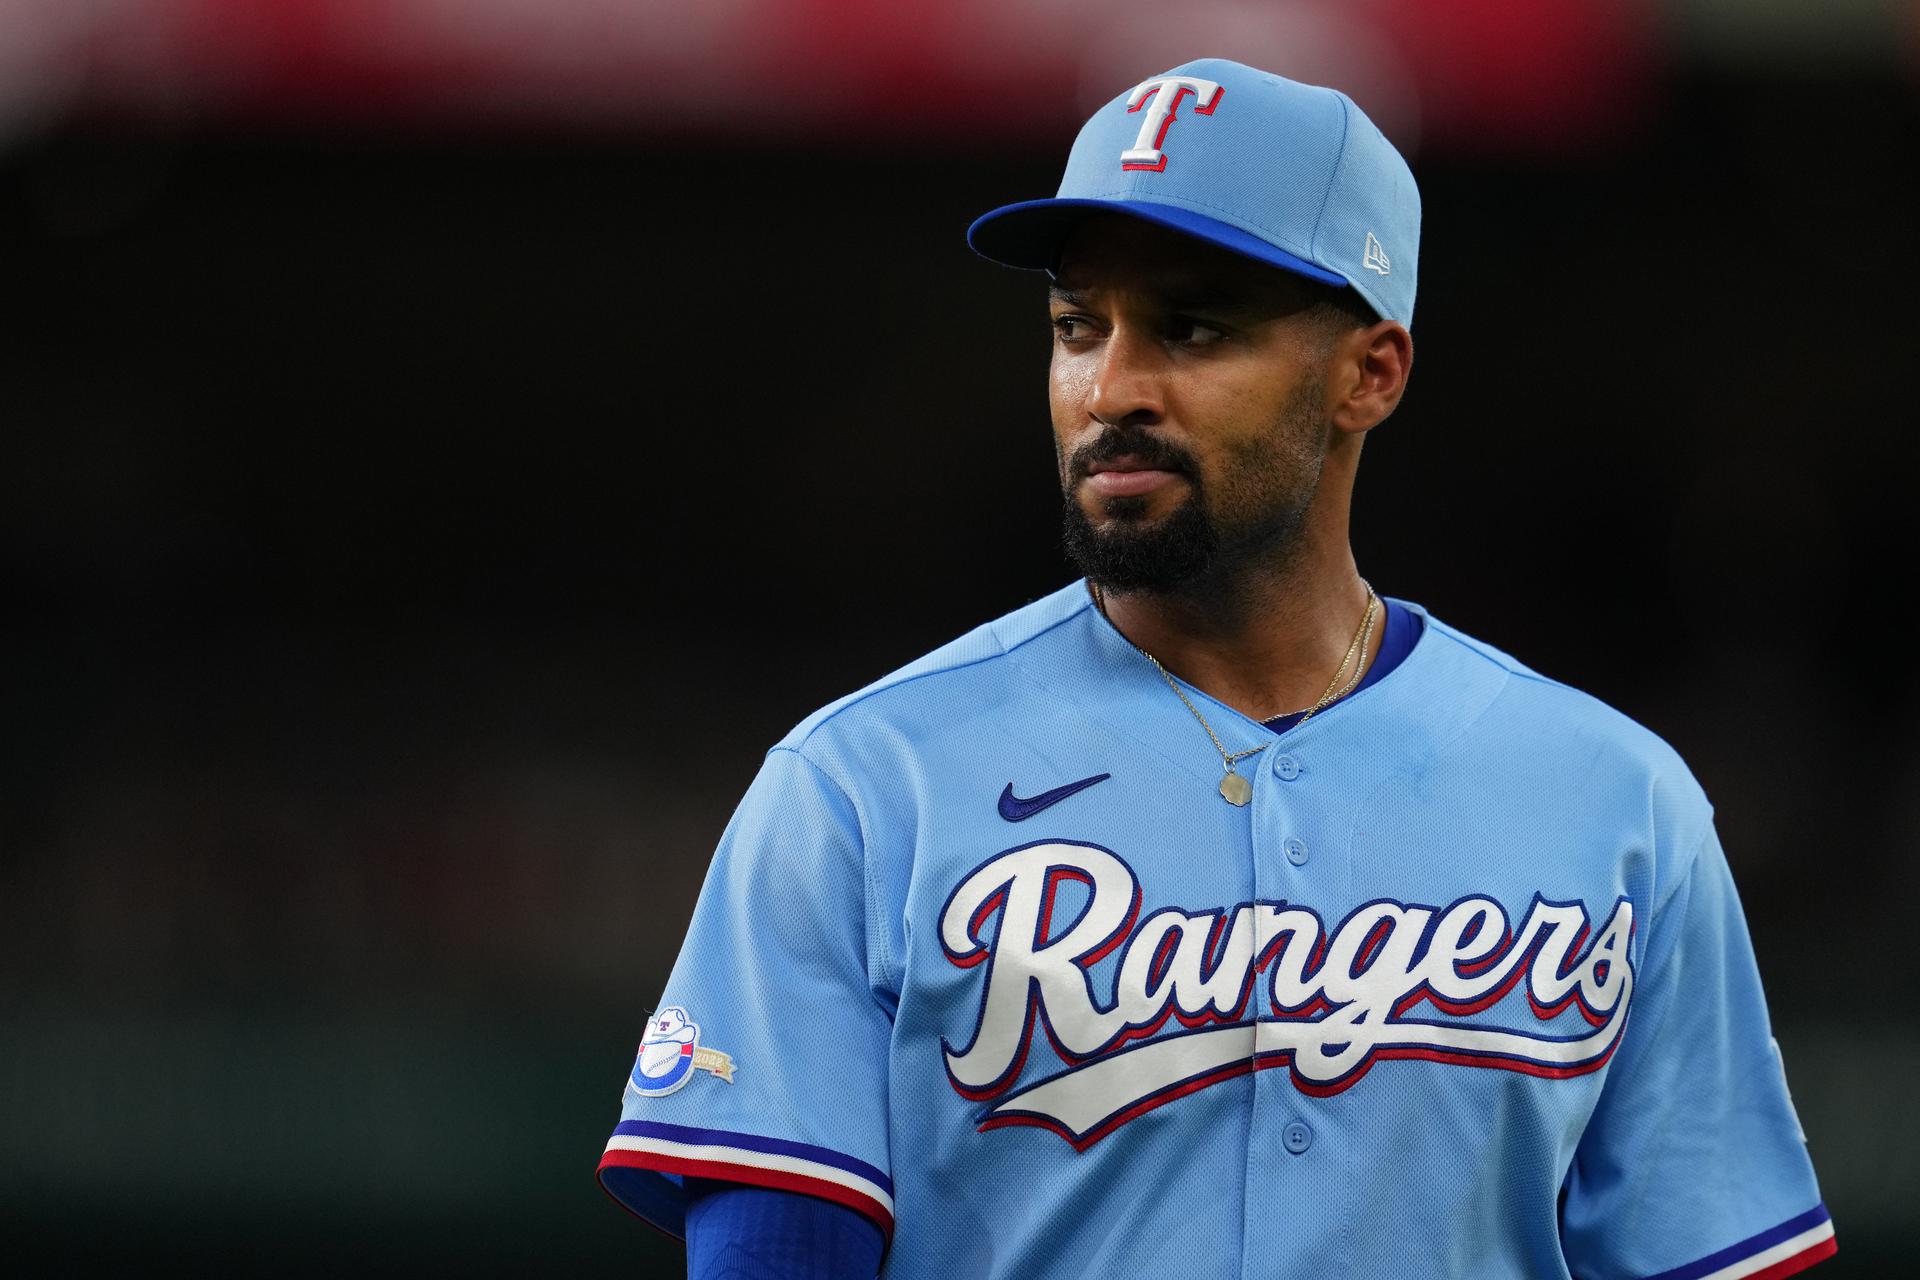 Why slumping Rangers star is staying positive